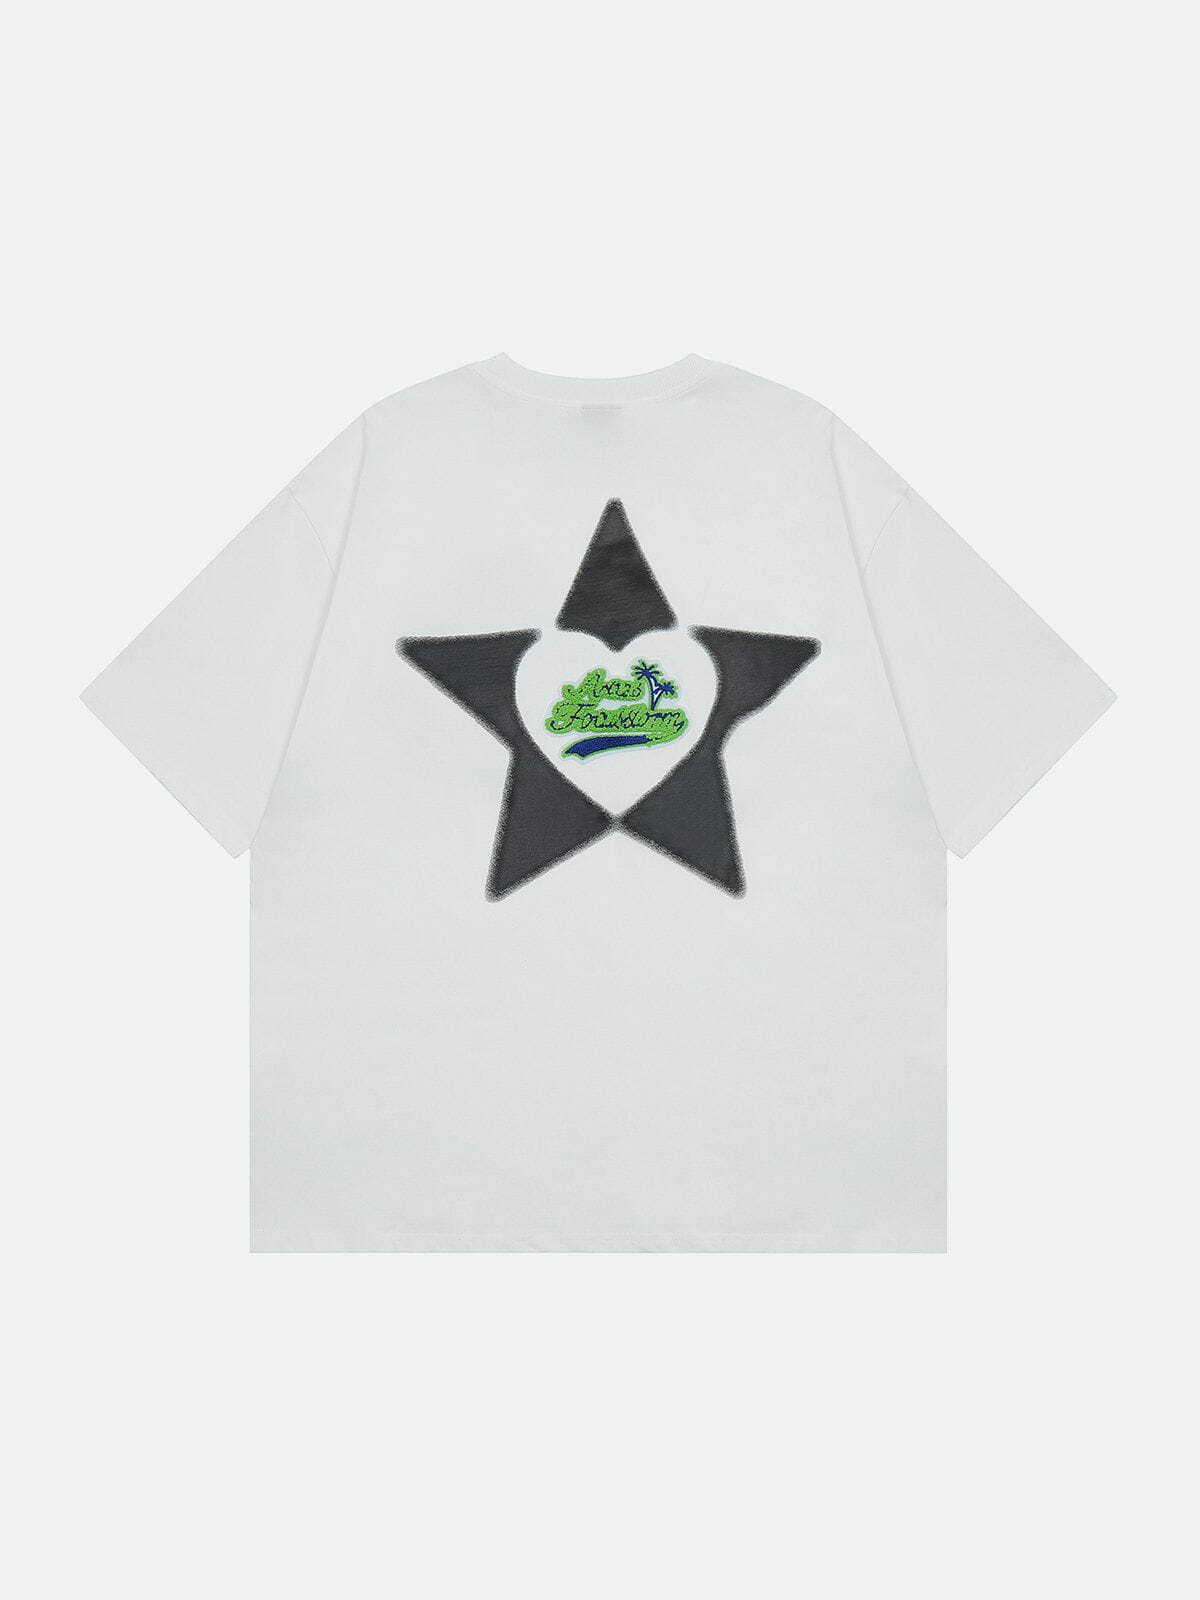 embroidered star tee trendy & youthful streetwear 1124